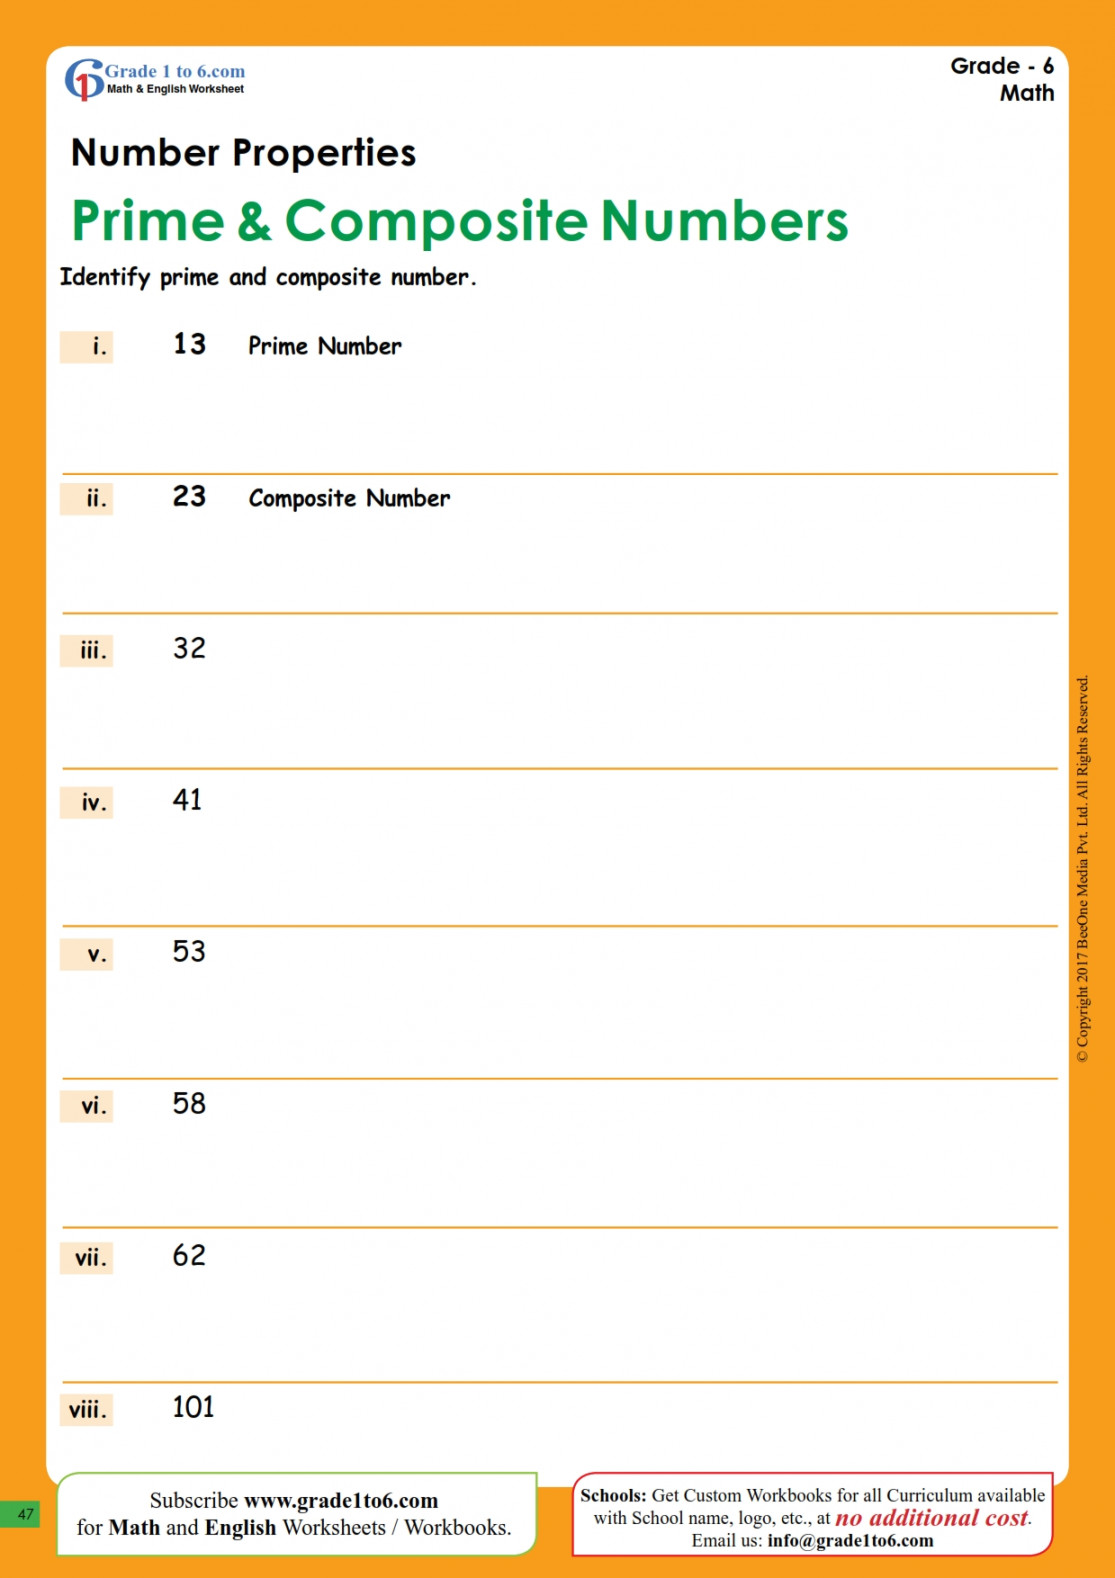 Prime and Composite Numbers Worksheets  Gradeto